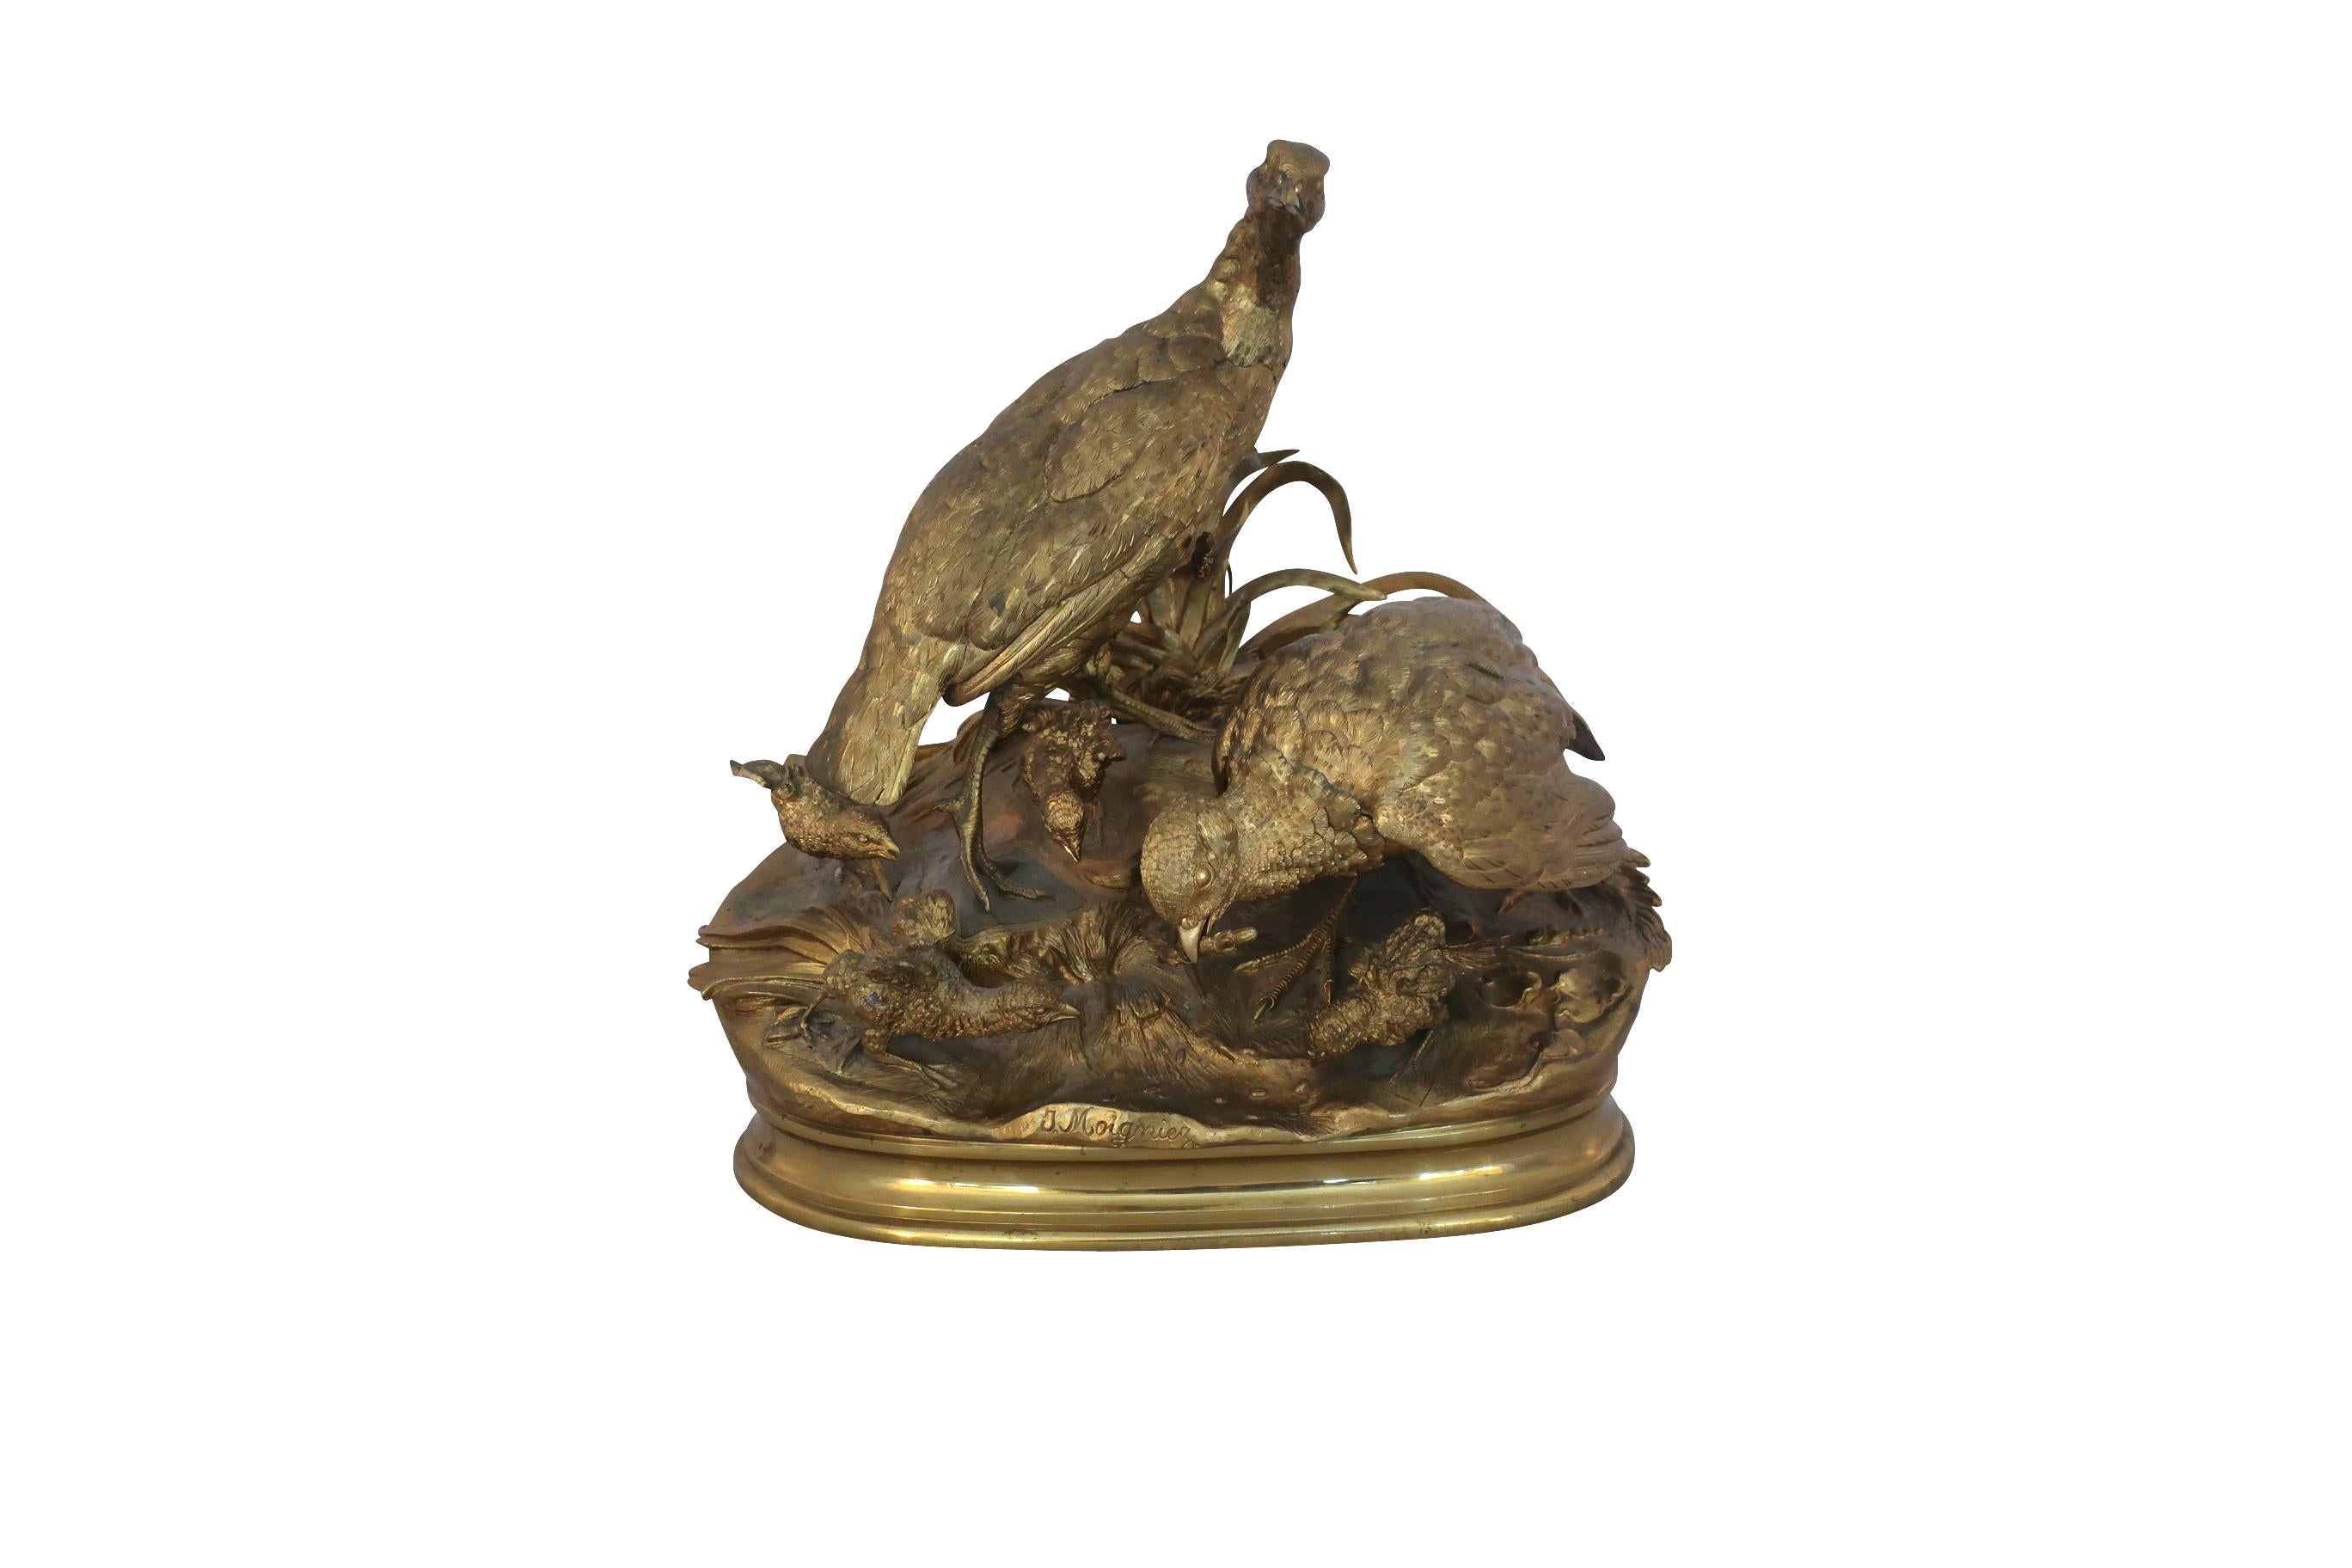 Antique French bronze sculpture of a partridge family by Jules Moigniez, 19th century. Exquisitely chiseled and cast, as is almost always the case with lifetime works by Moigniez, this fine cabinet bronze is full of life and motion. Moigniez’s